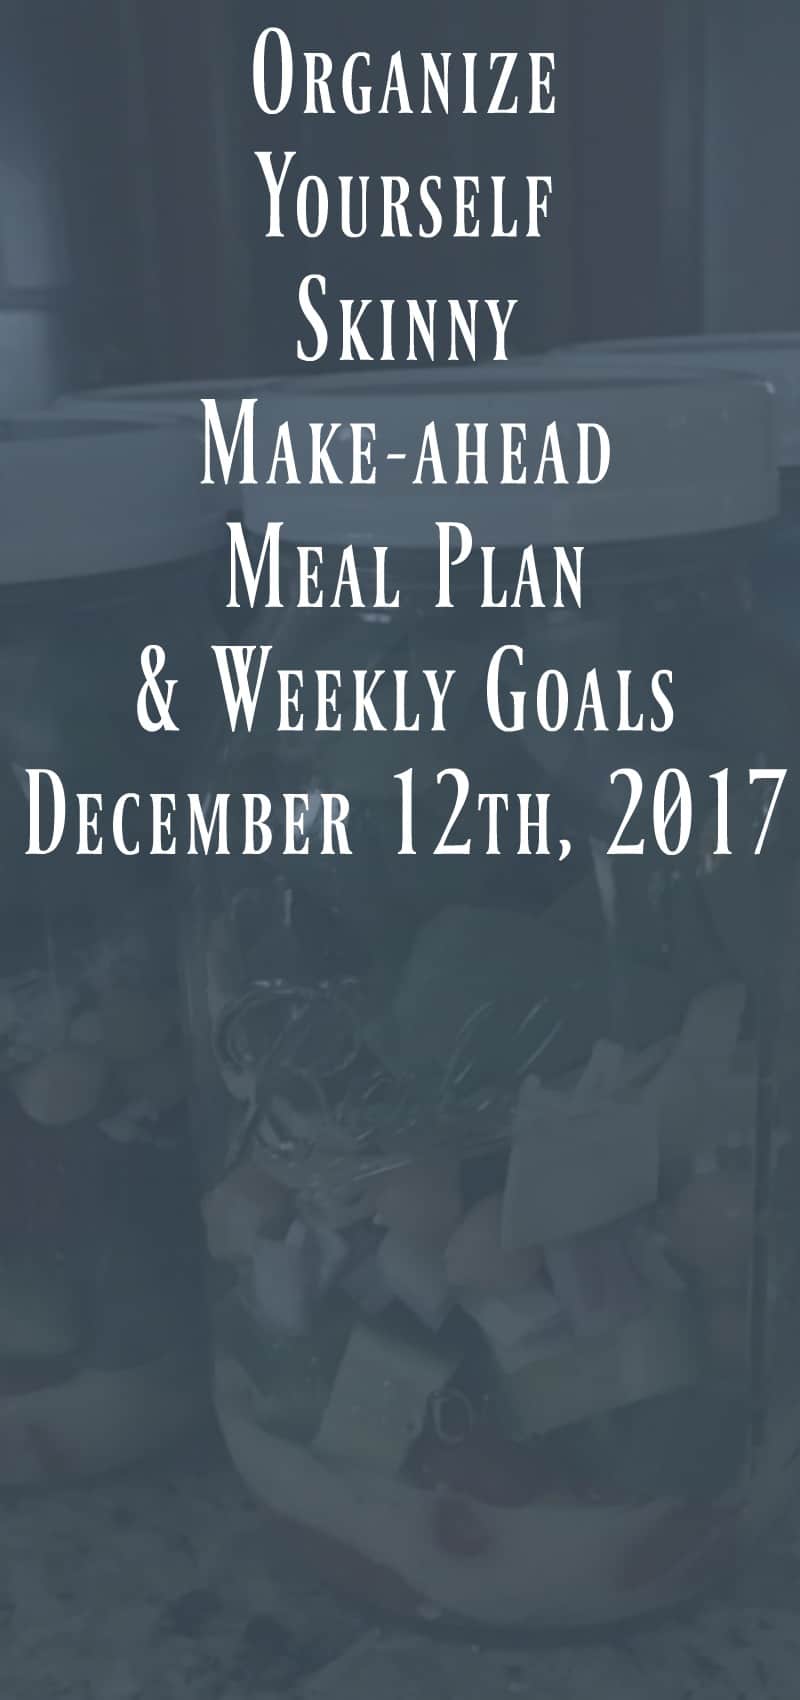 Make-ahead meal Plan and weekly goals 